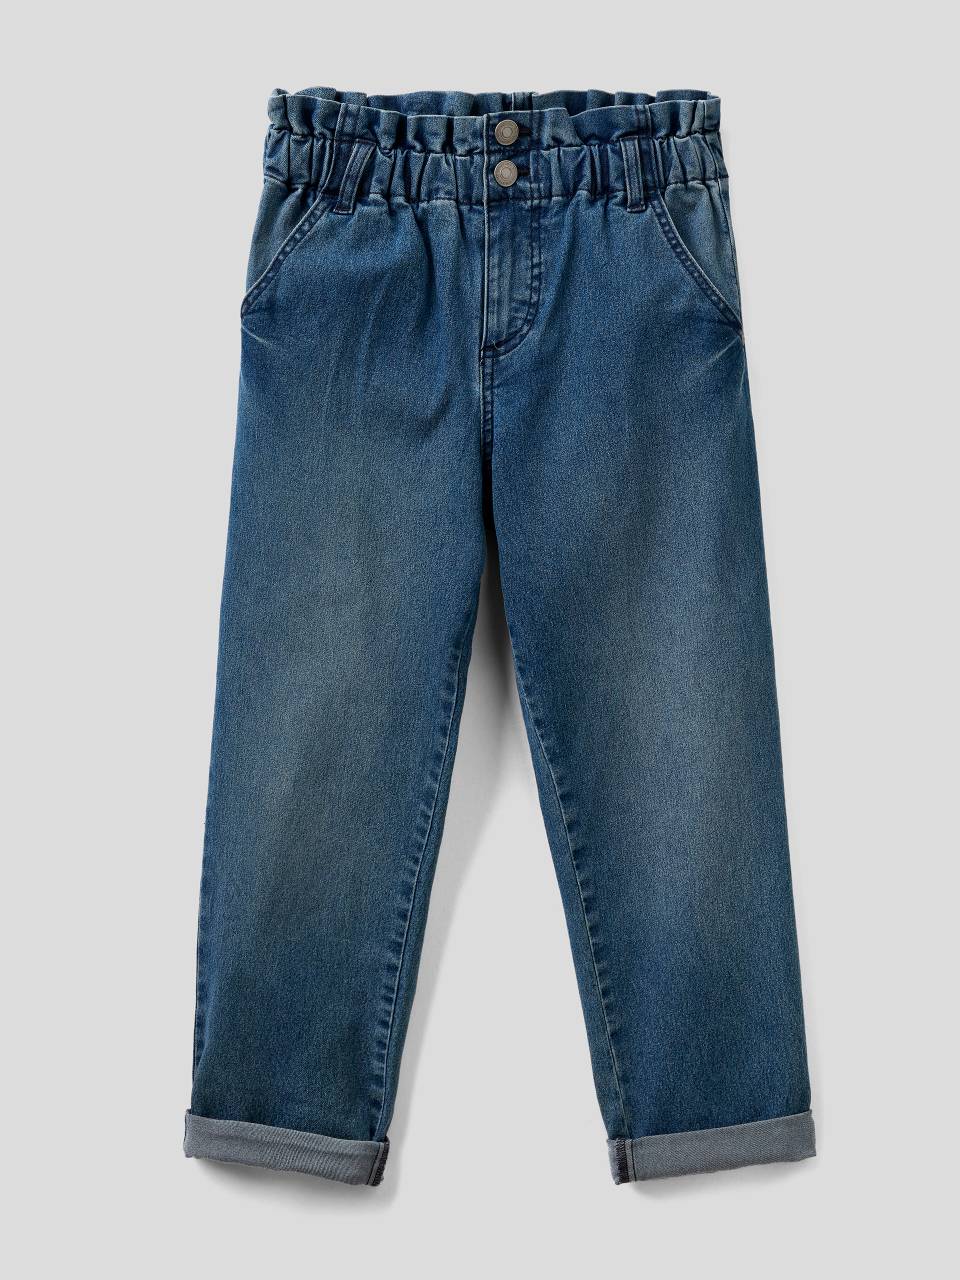 Benetton Baggy fit jeans with gathered waist. 1